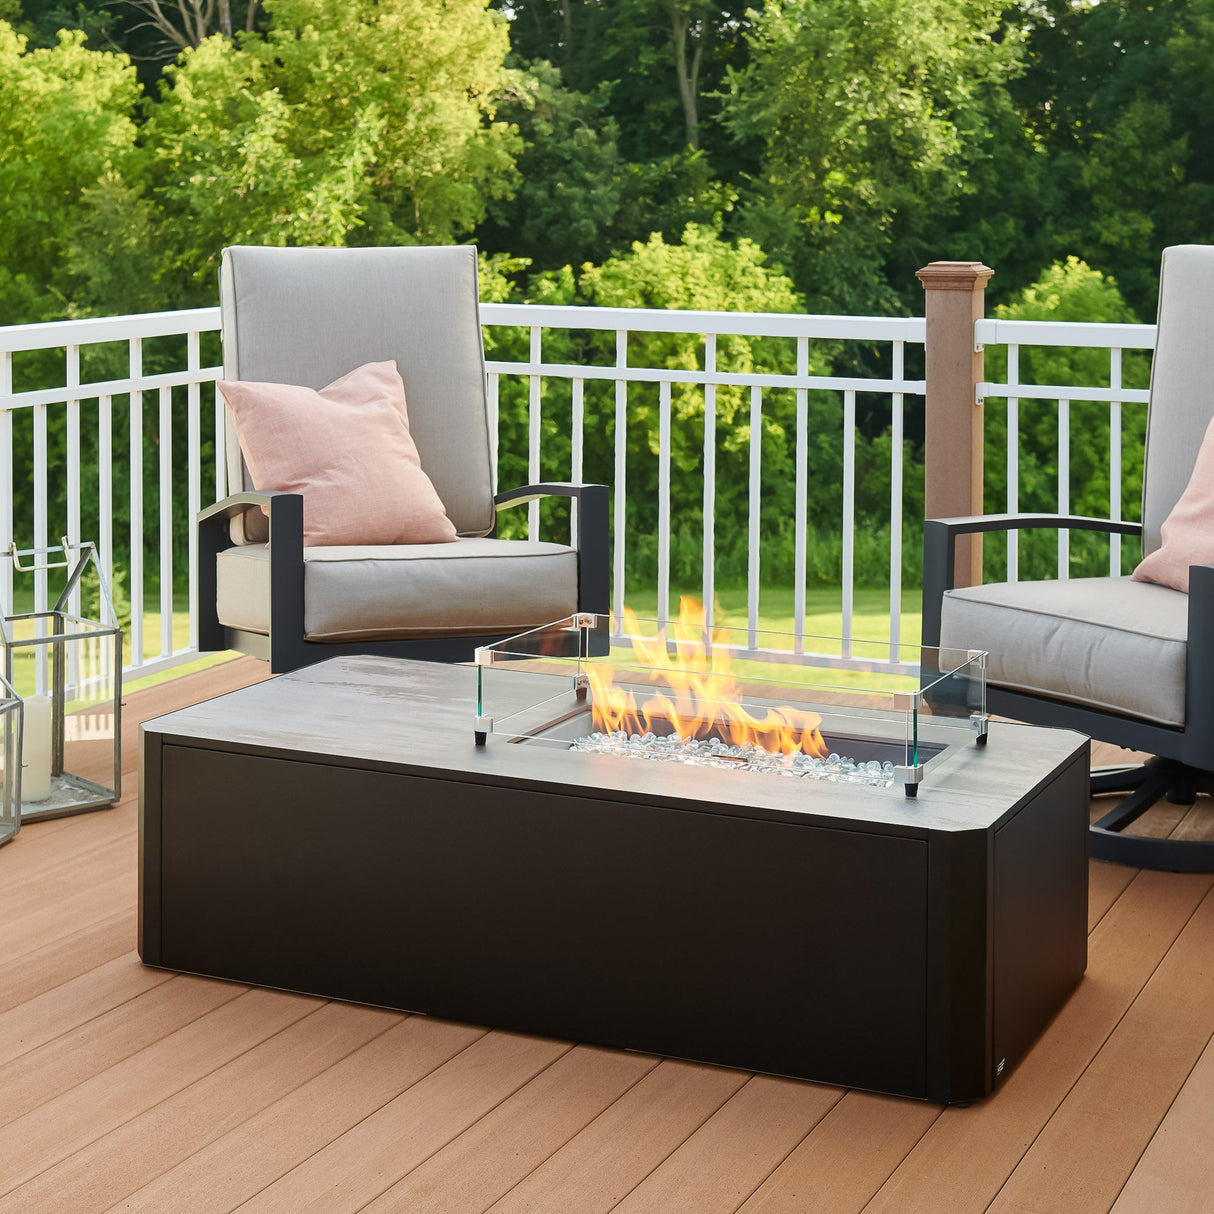 Kinney Rectangular Gas Fire Pit Table with a glass wind guard being used to protect the flame